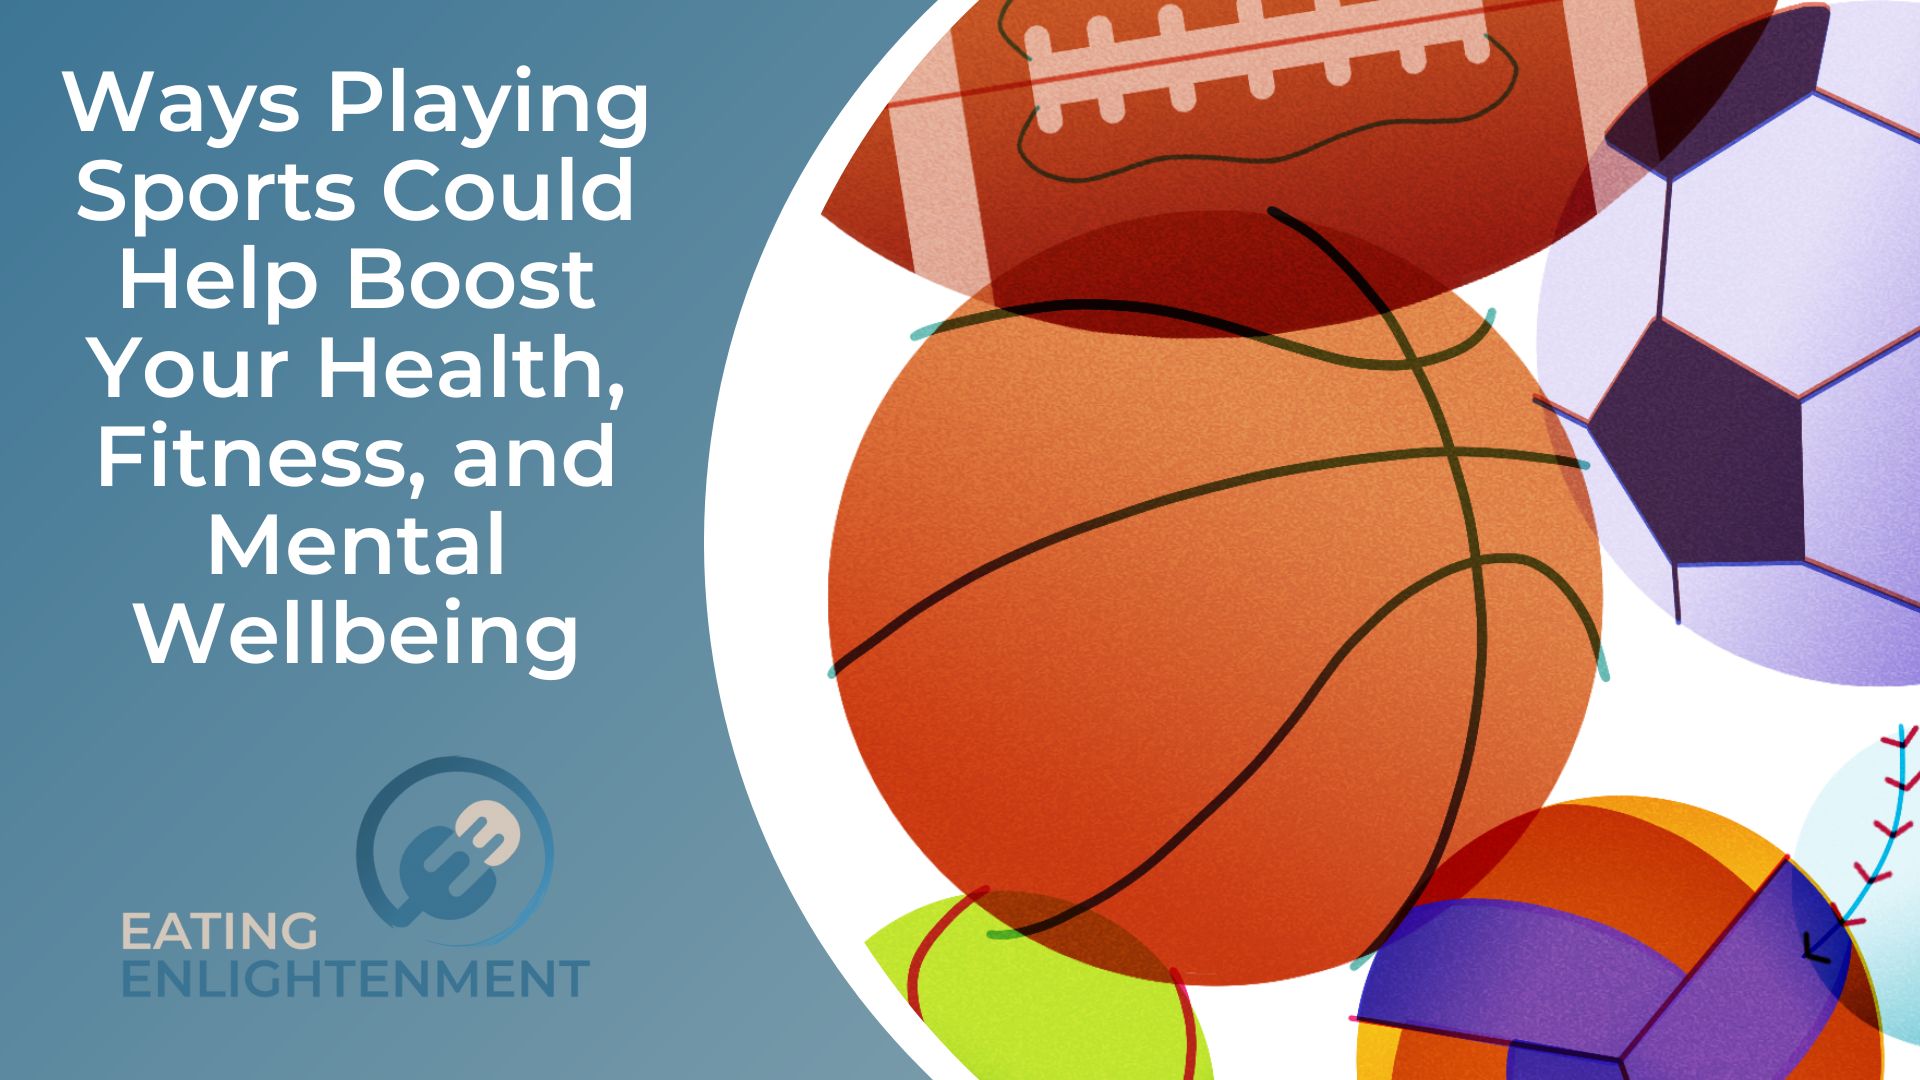 Ways Playing Sports Could Help Boost Your Health, Fitness, and Mental Wellbeing